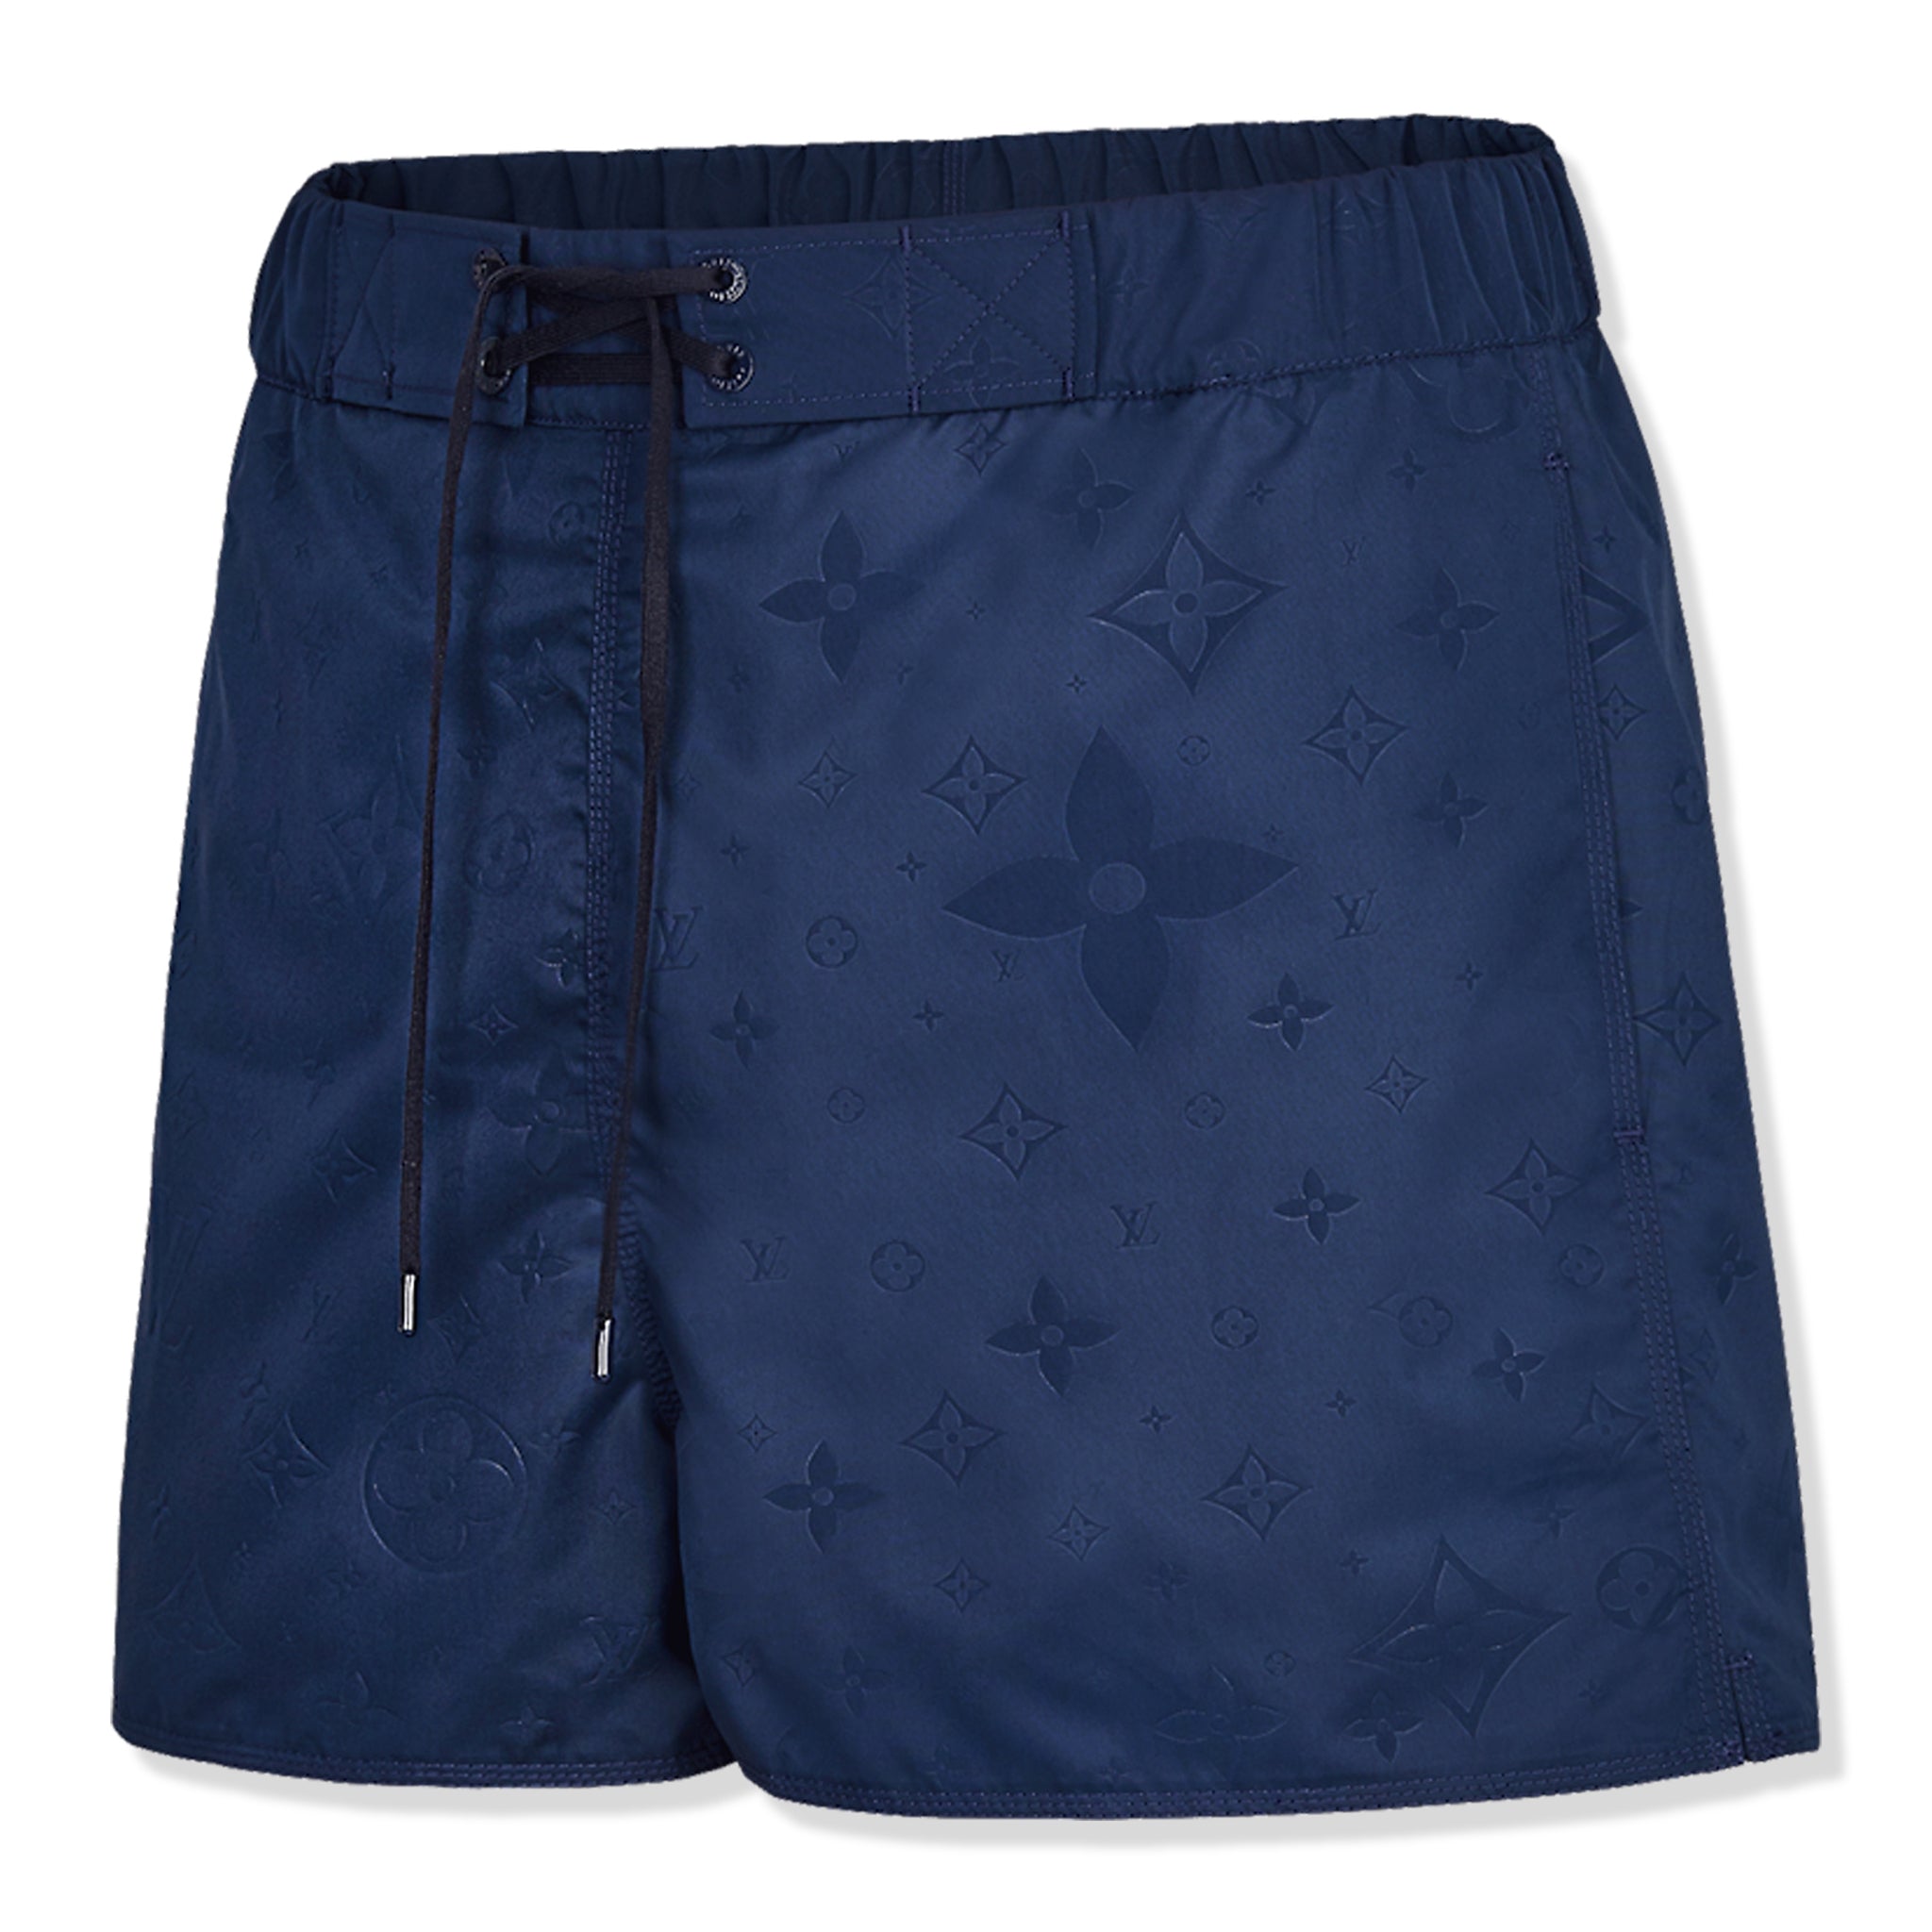 Image of Pre Owned - Louis Vuitton Monogram 3D Pocket Blue Board Shorts